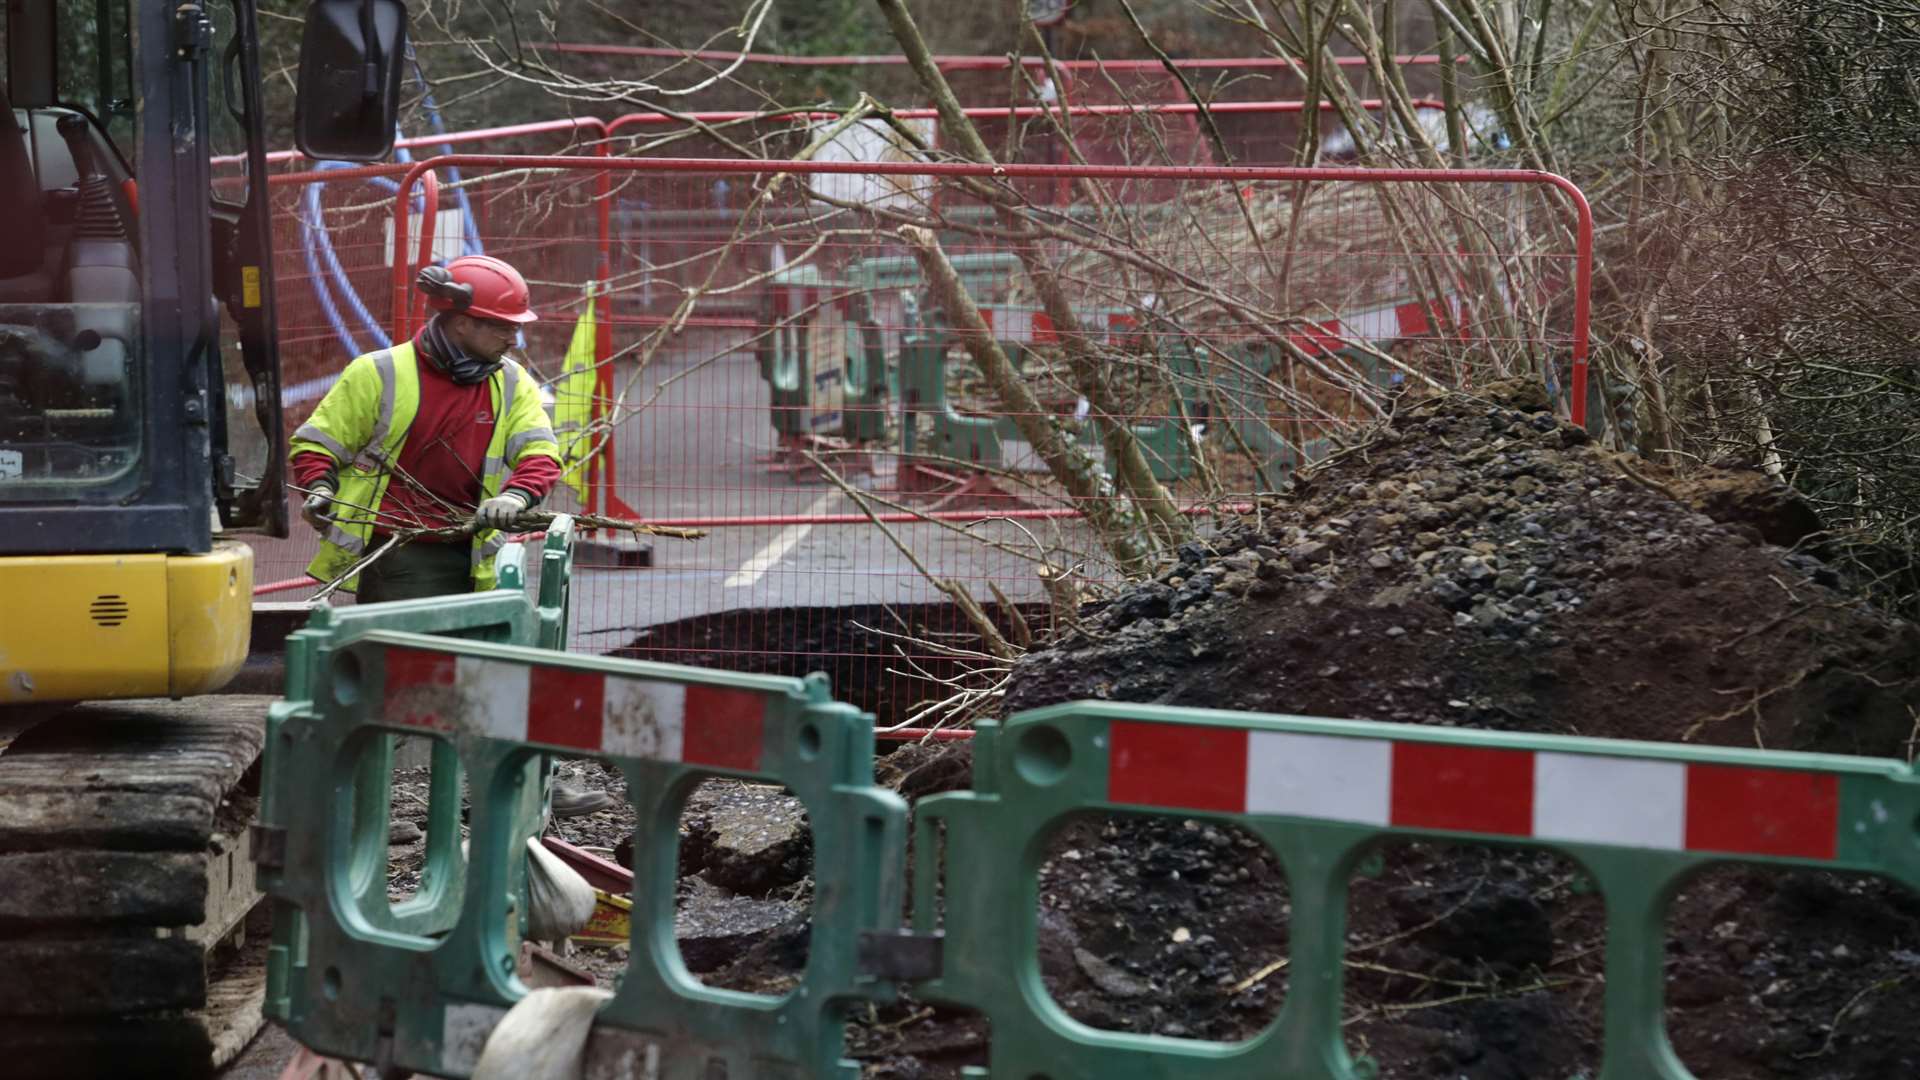 The road collapsed in January following a leak